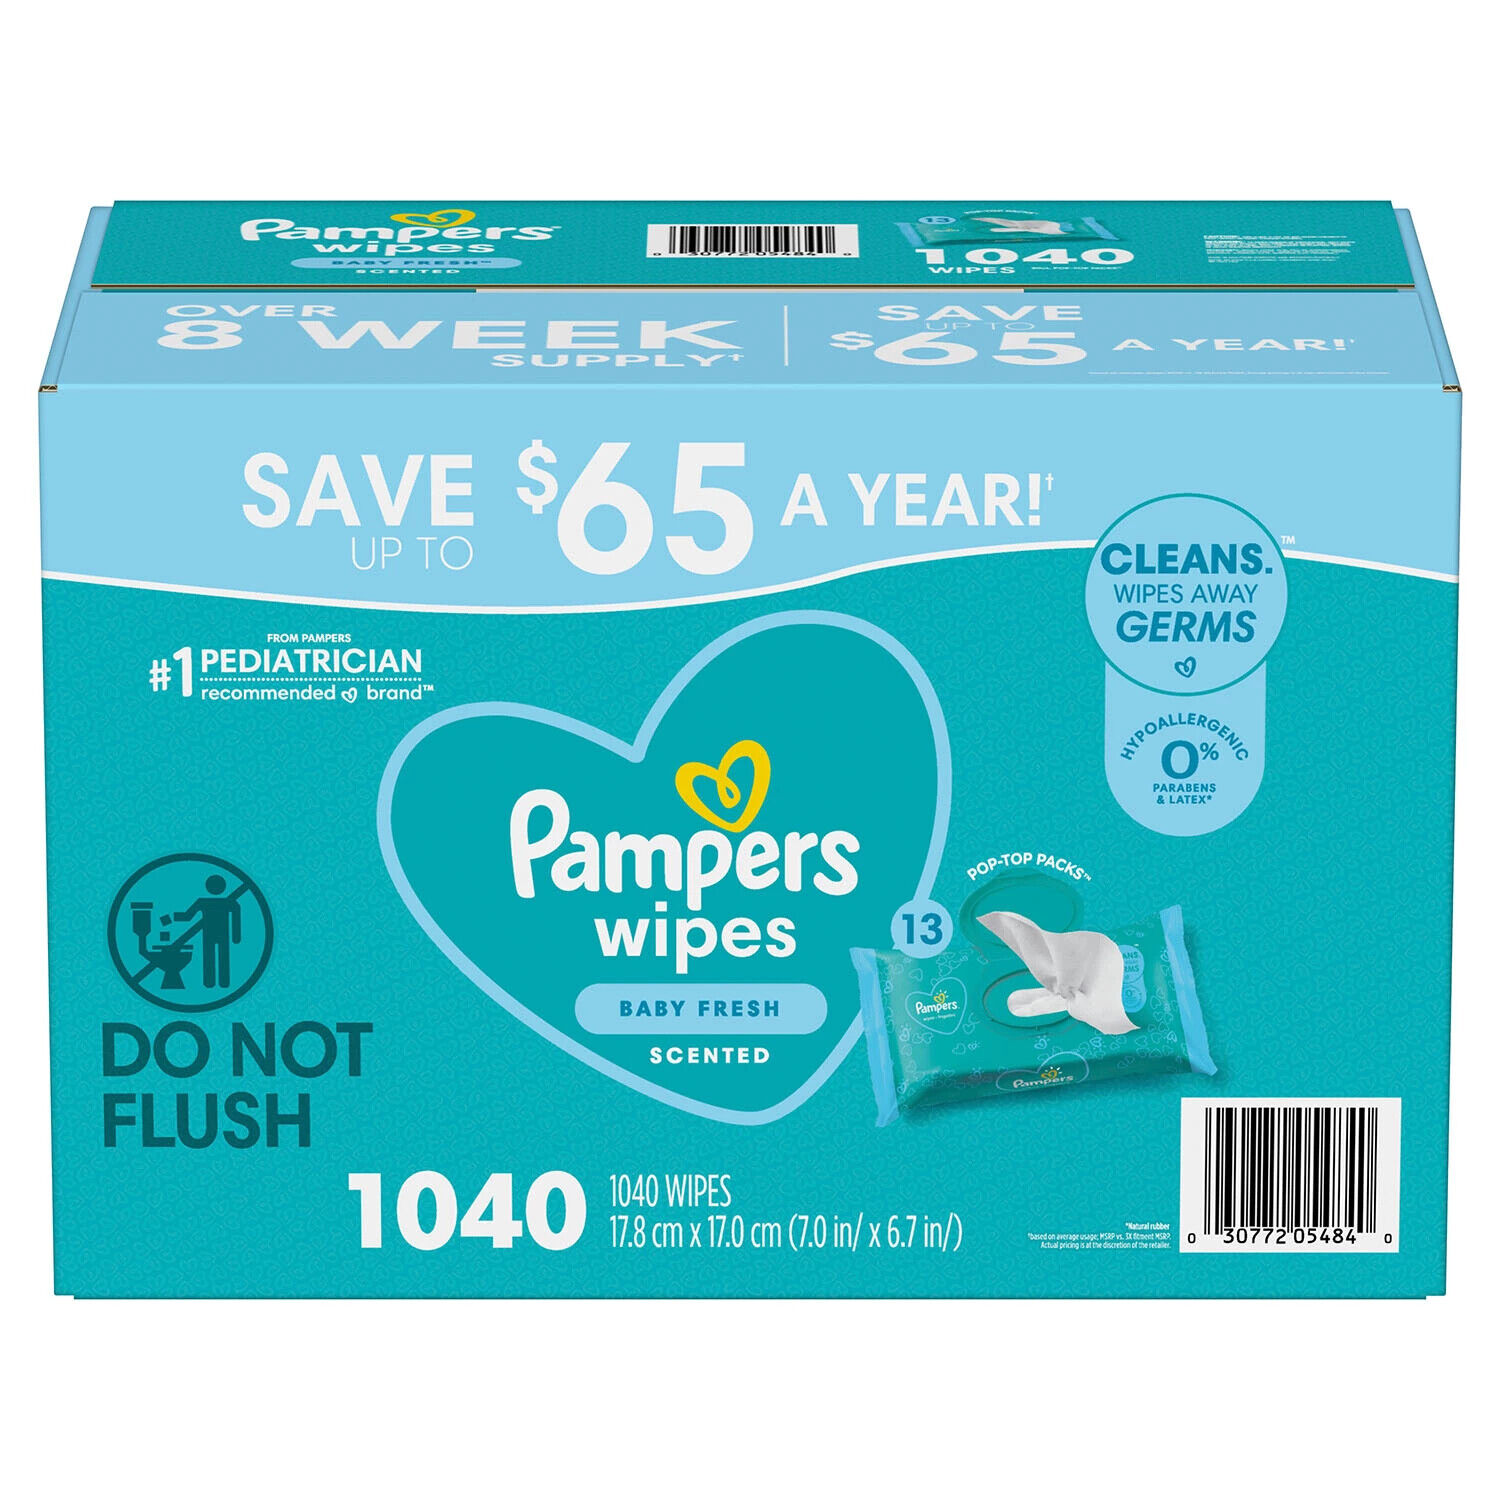 Pampers Scented Baby Wipes, Baby Fresh (1040 ct.) Pampers NOT SPECIFIED